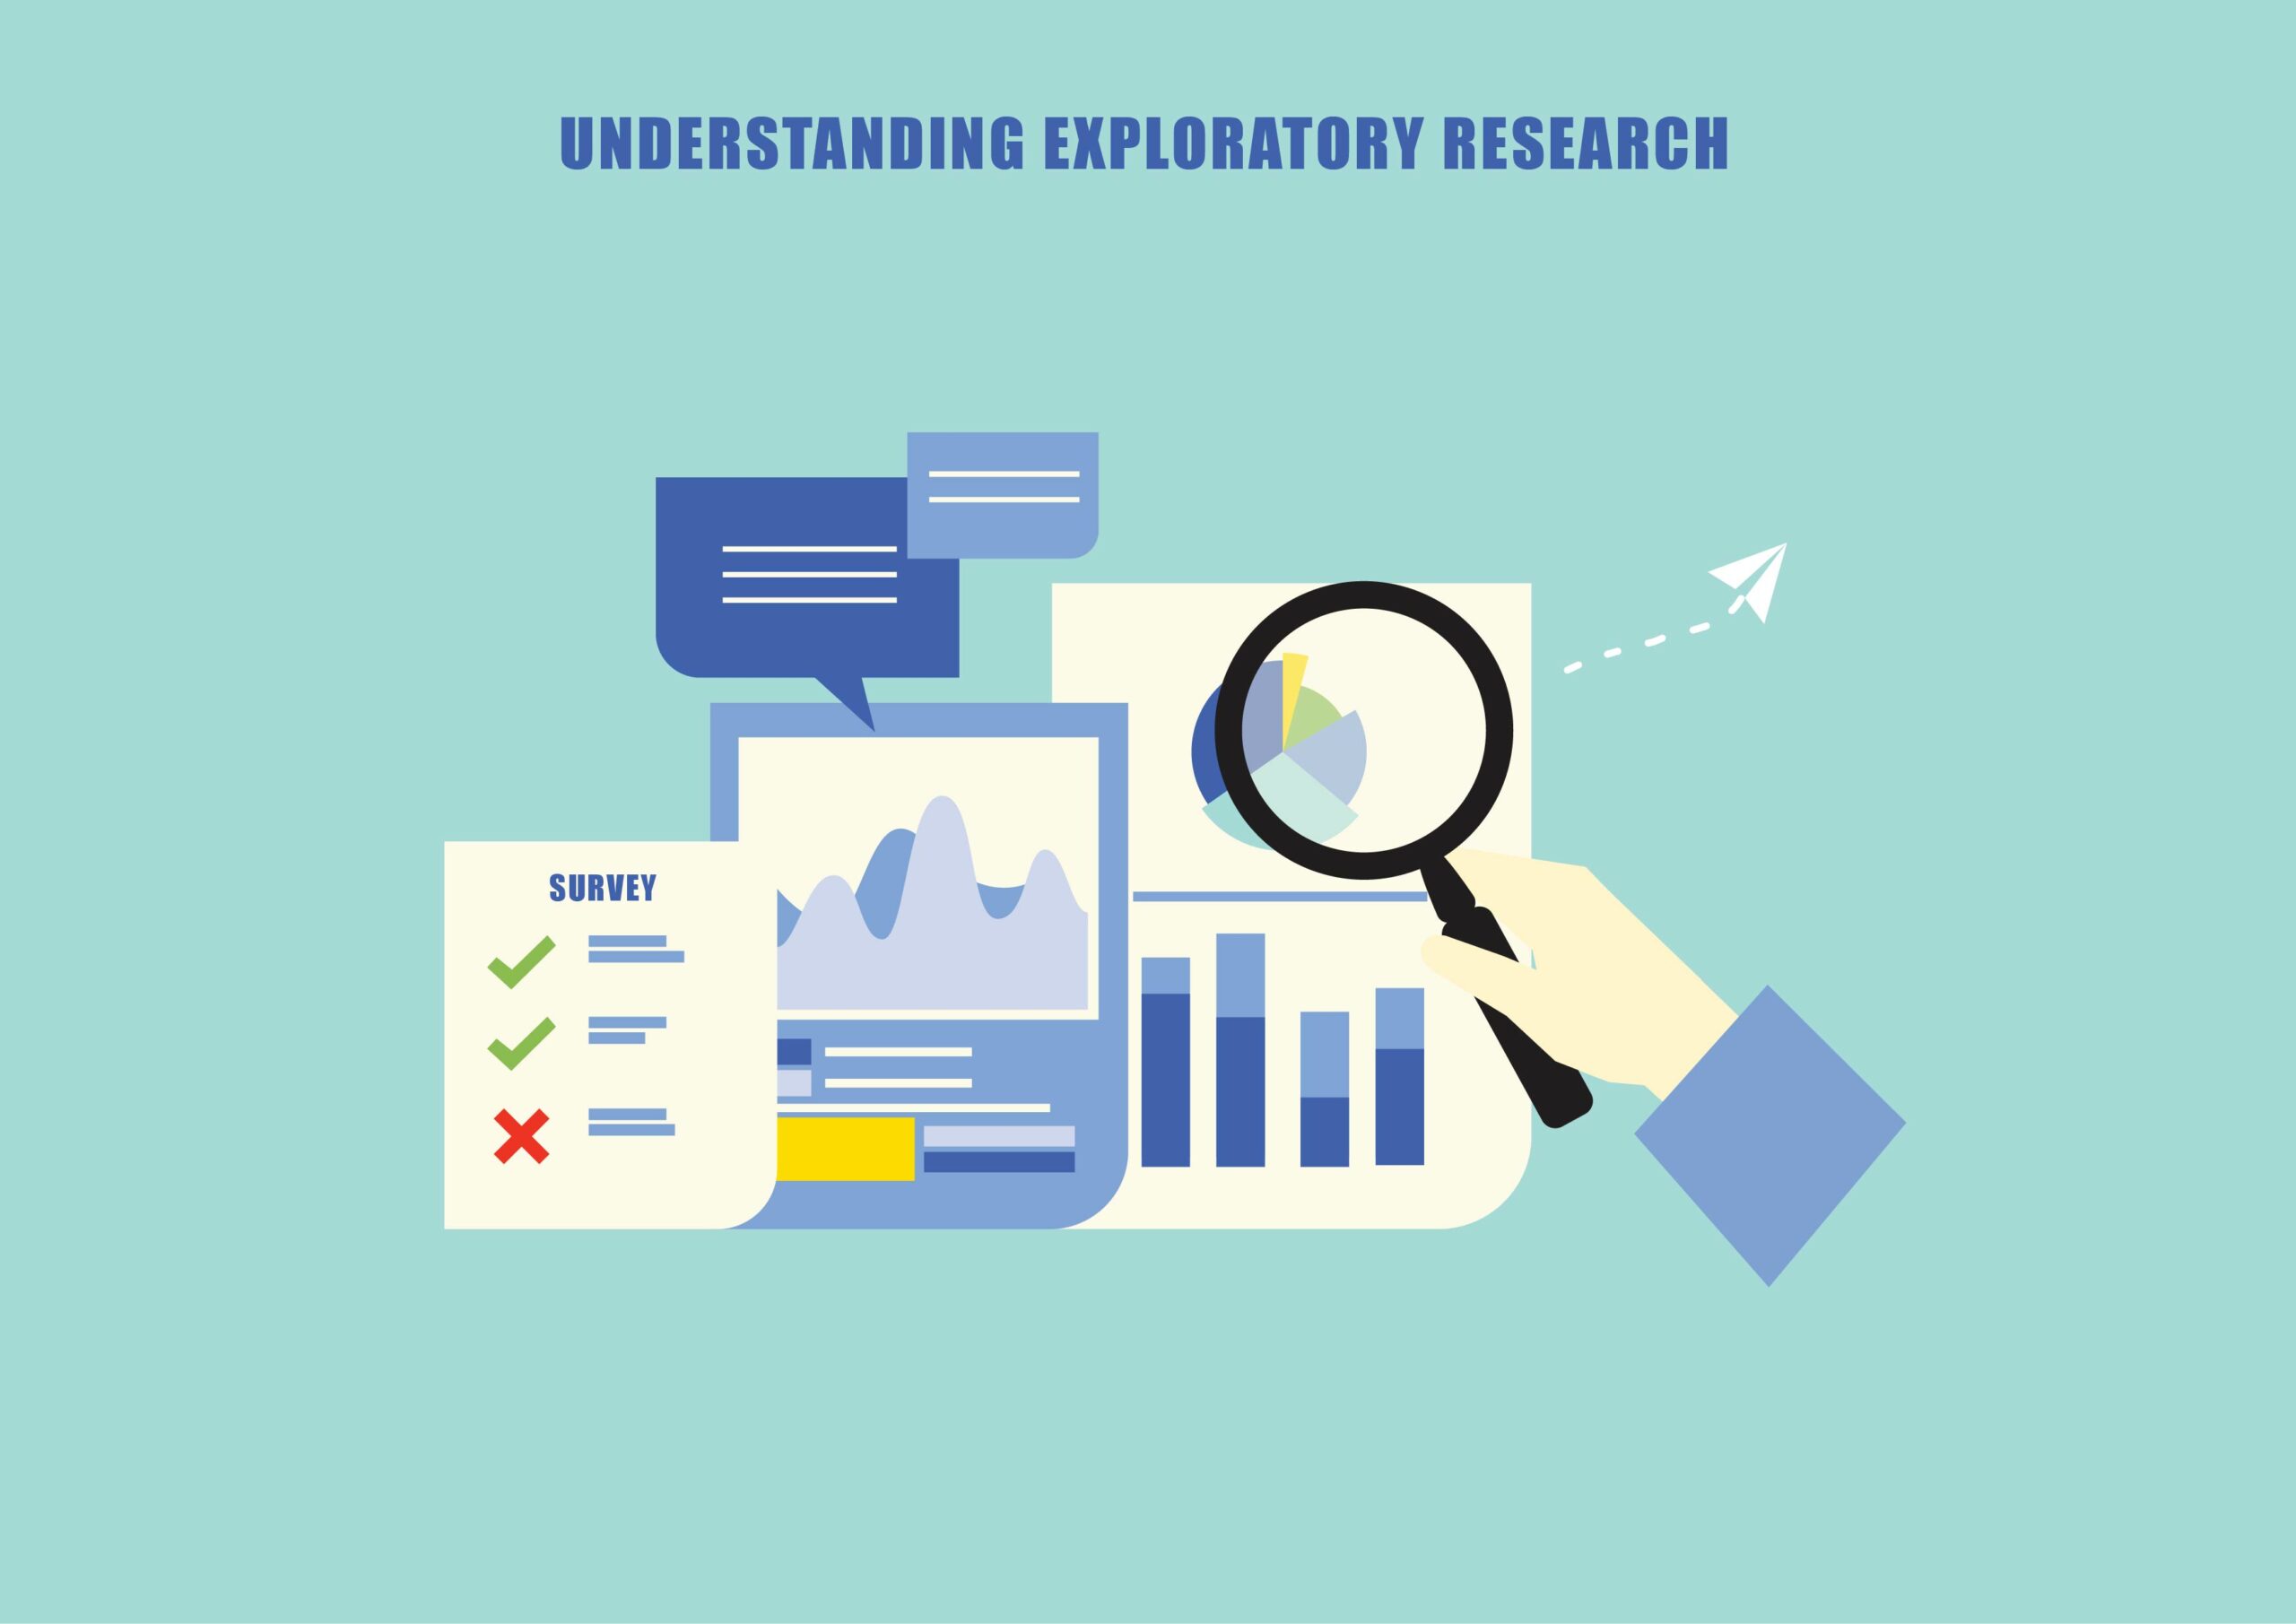 in exploratory research design which type of questions are studied